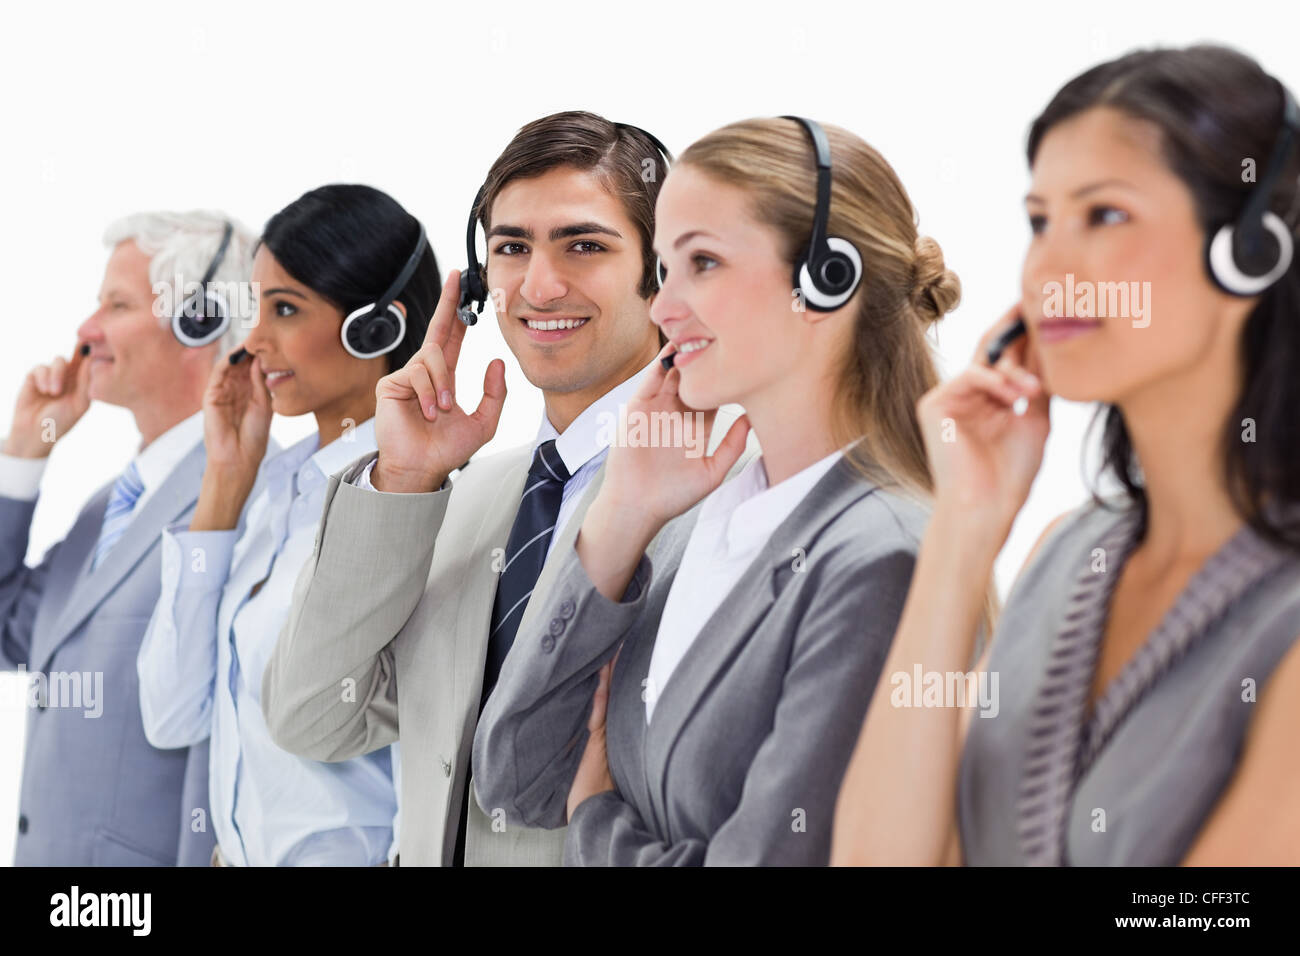 Smiling professionals in suits listening Stock Photo